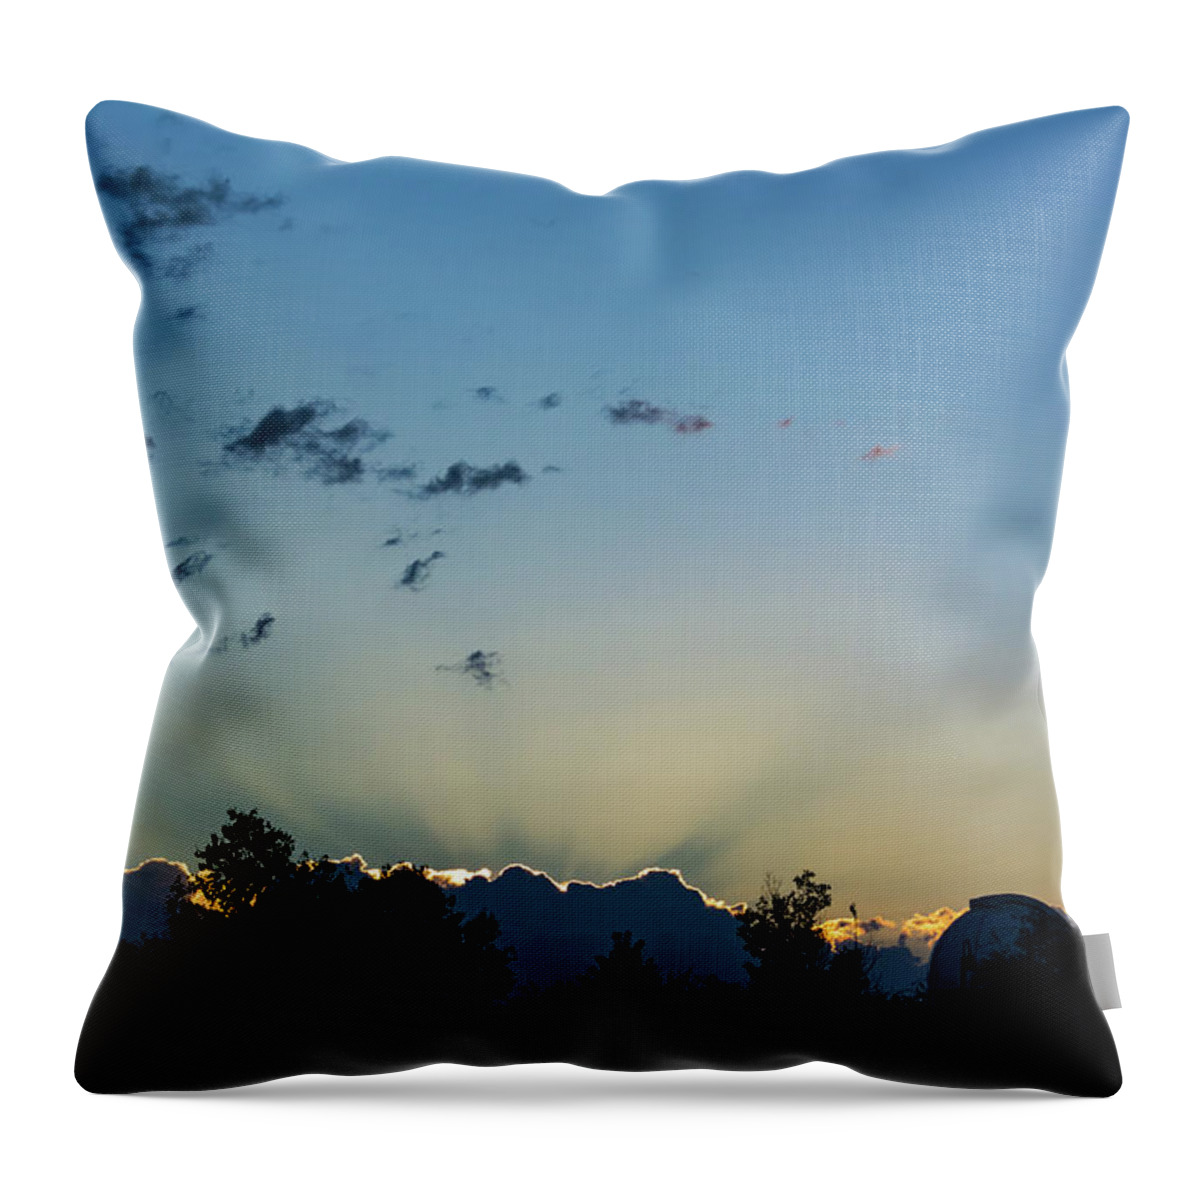 Silver Lining Throw Pillow featuring the photograph Silver Lining by Douglas Killourie